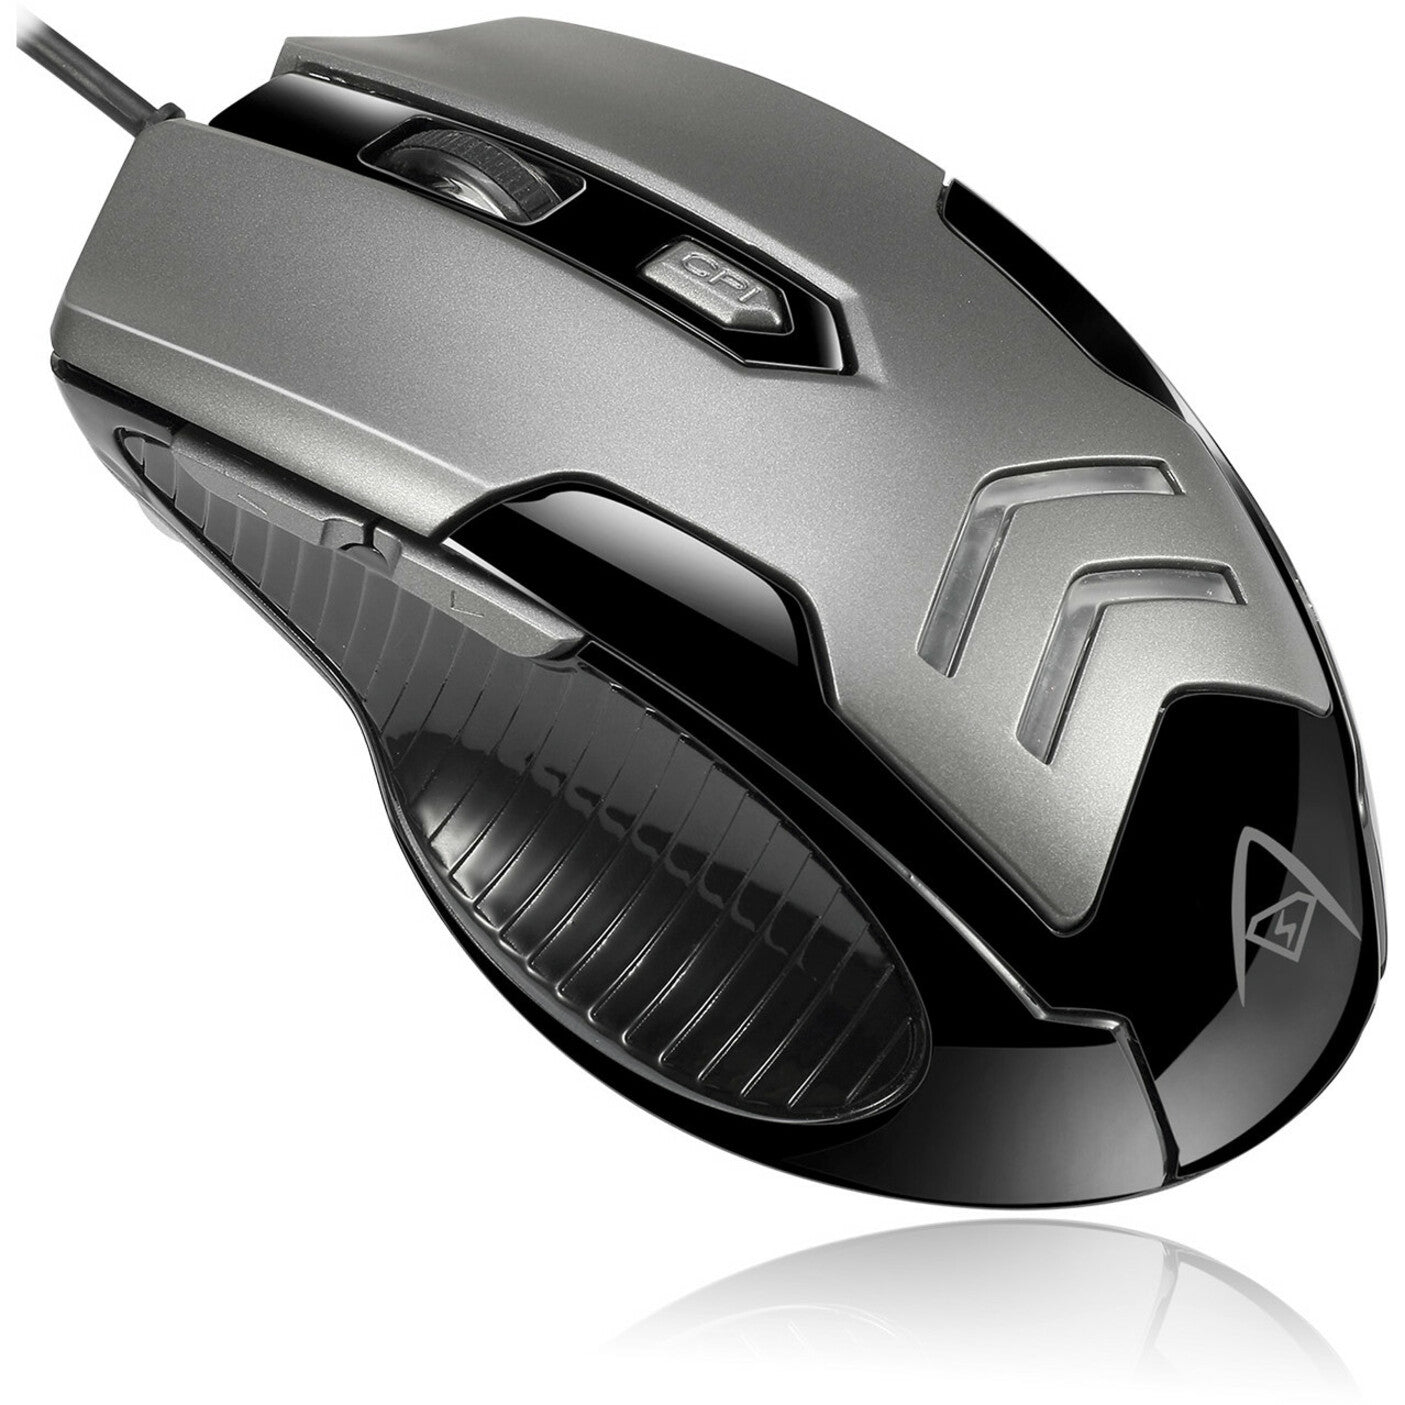 Adesso IMOUSE X1 Multi-Color 6-Button Gaming Mouse, Ergonomic Fit, 3200 DPI, USB Wired